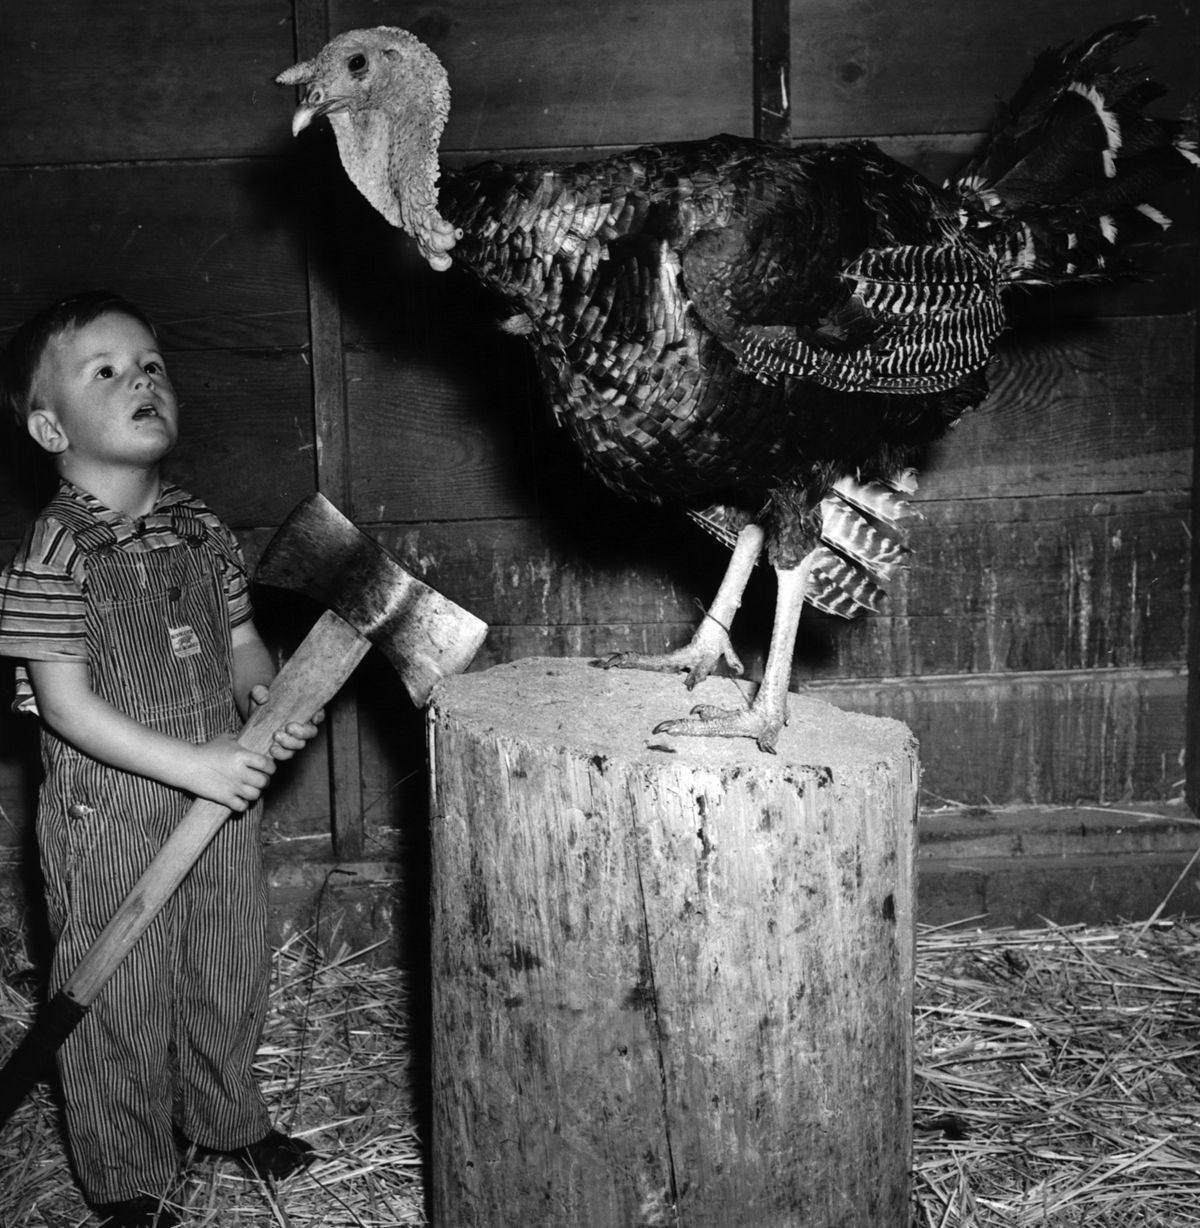 In a photo staged in the early 1940s by his father, young Bill Gothmann grips a hatchet and looks at a turkey at the family business.